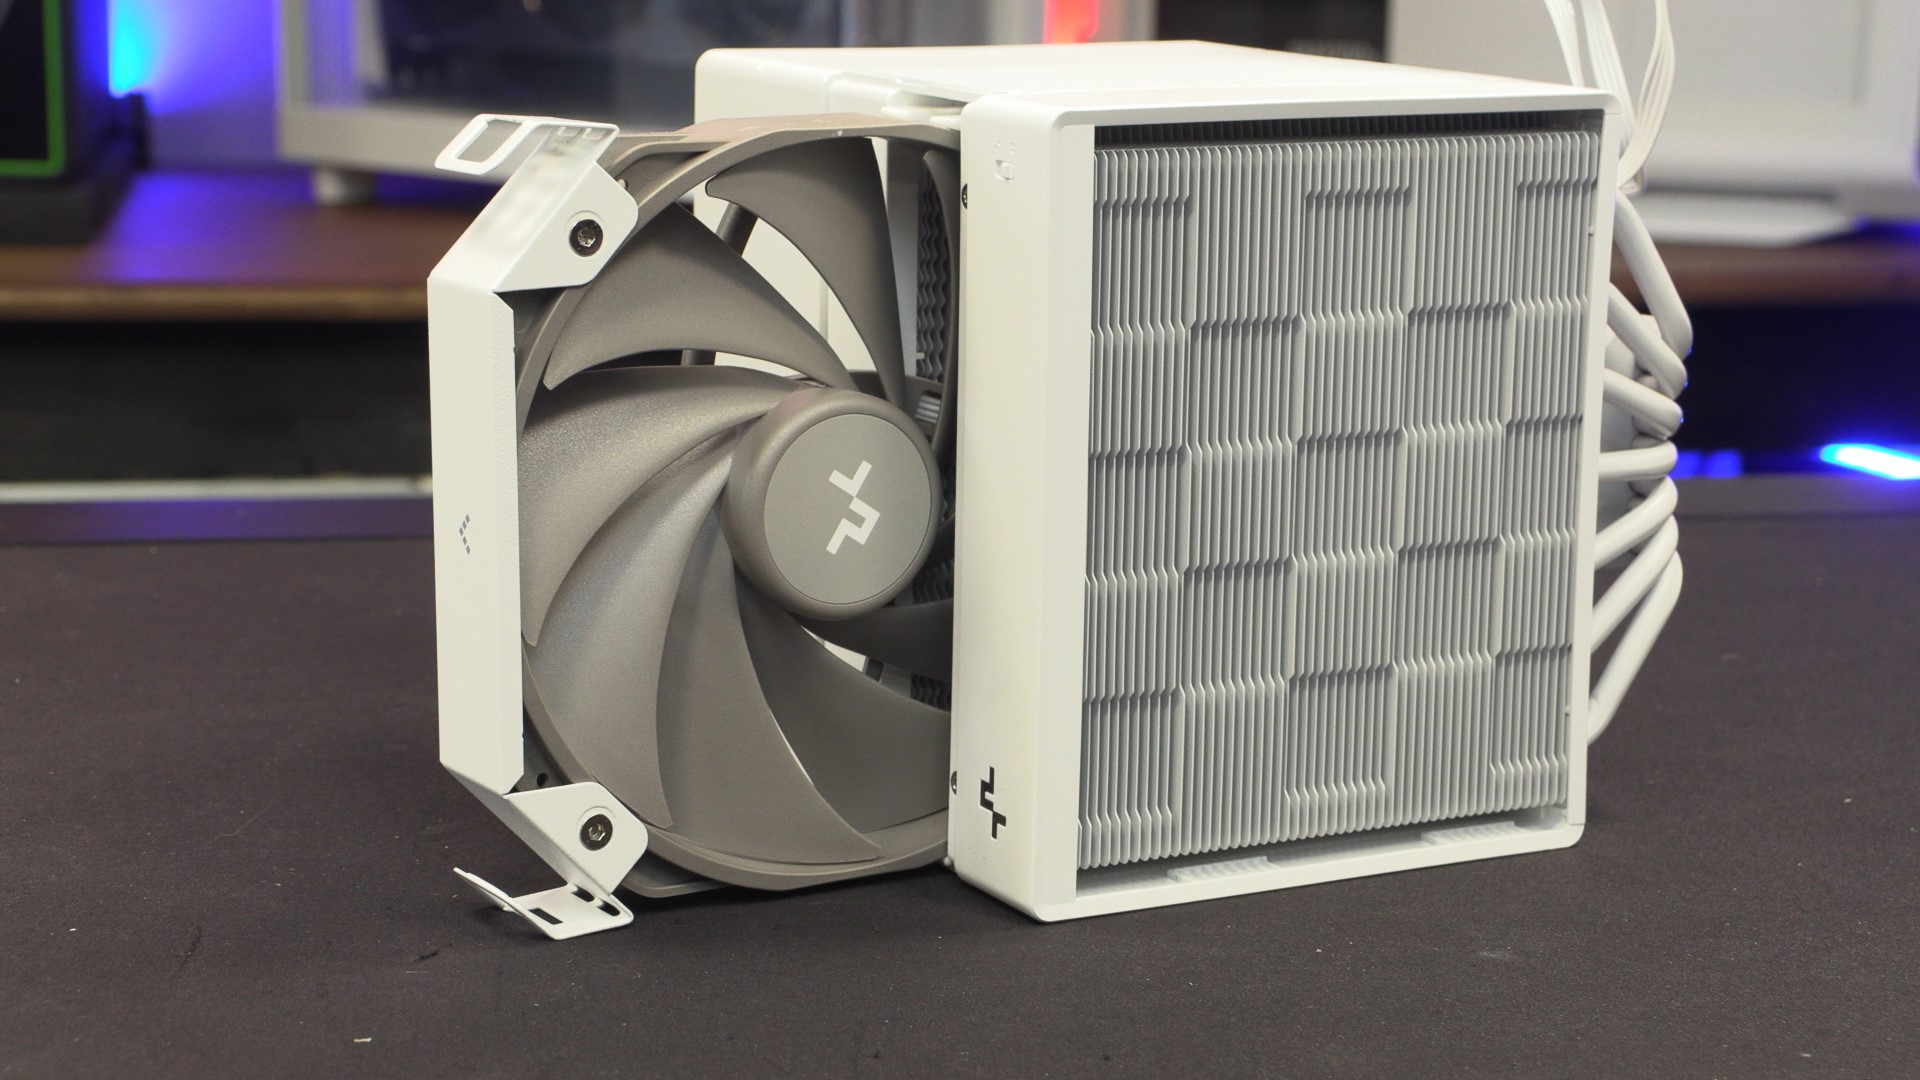 New Deepcool Assassin IV cube cooler gets ghostly white treatment